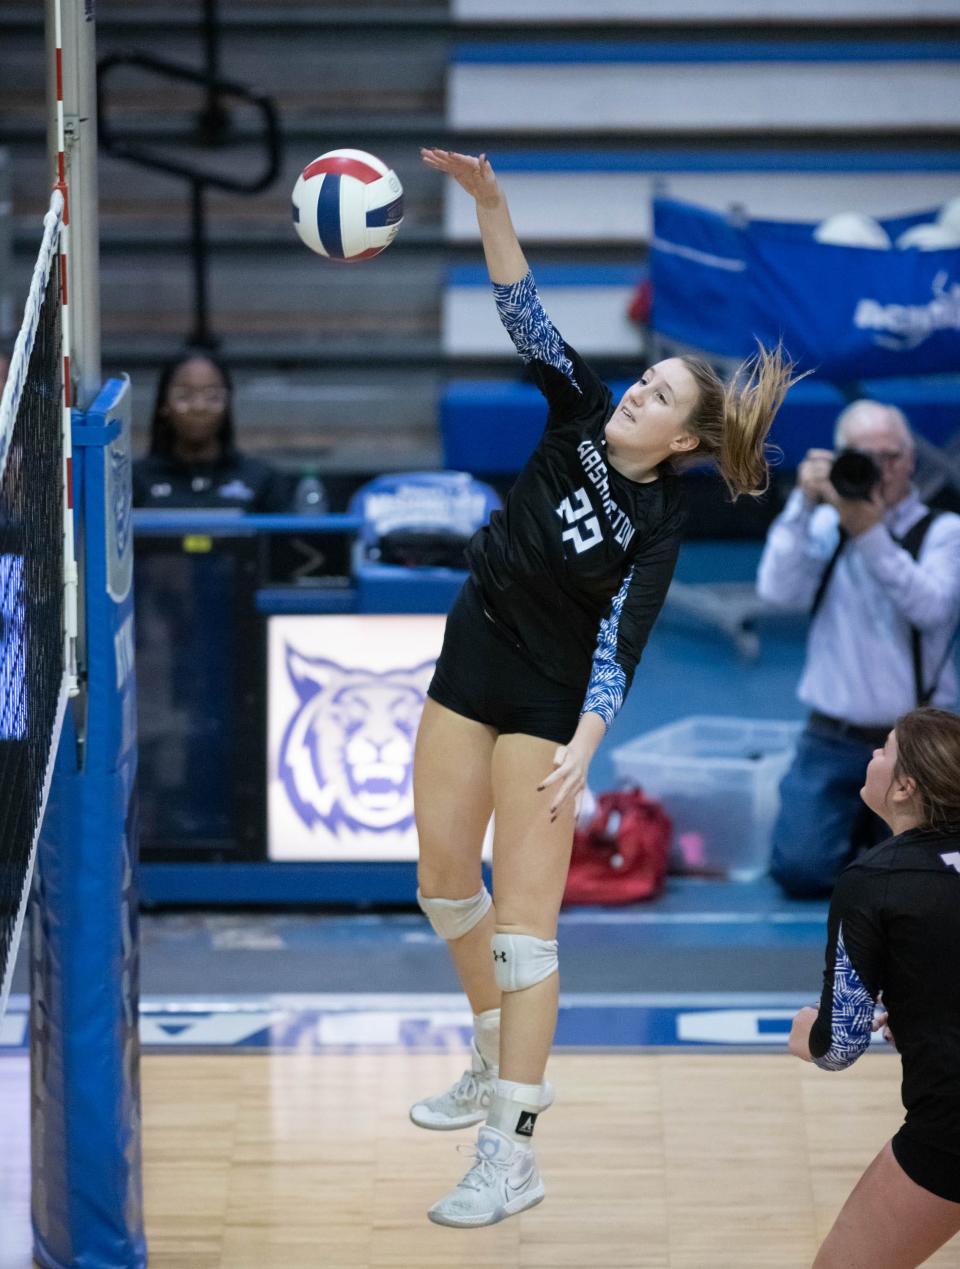 Lyla Davis (22) plays the ball during the Jacksonville Ridgeview vs Booker T. Washington region 1-5A quarterfinal volleyball game at Booker T. Washington High School in Pensacola on Wednesday, Oct. 26, 2022.